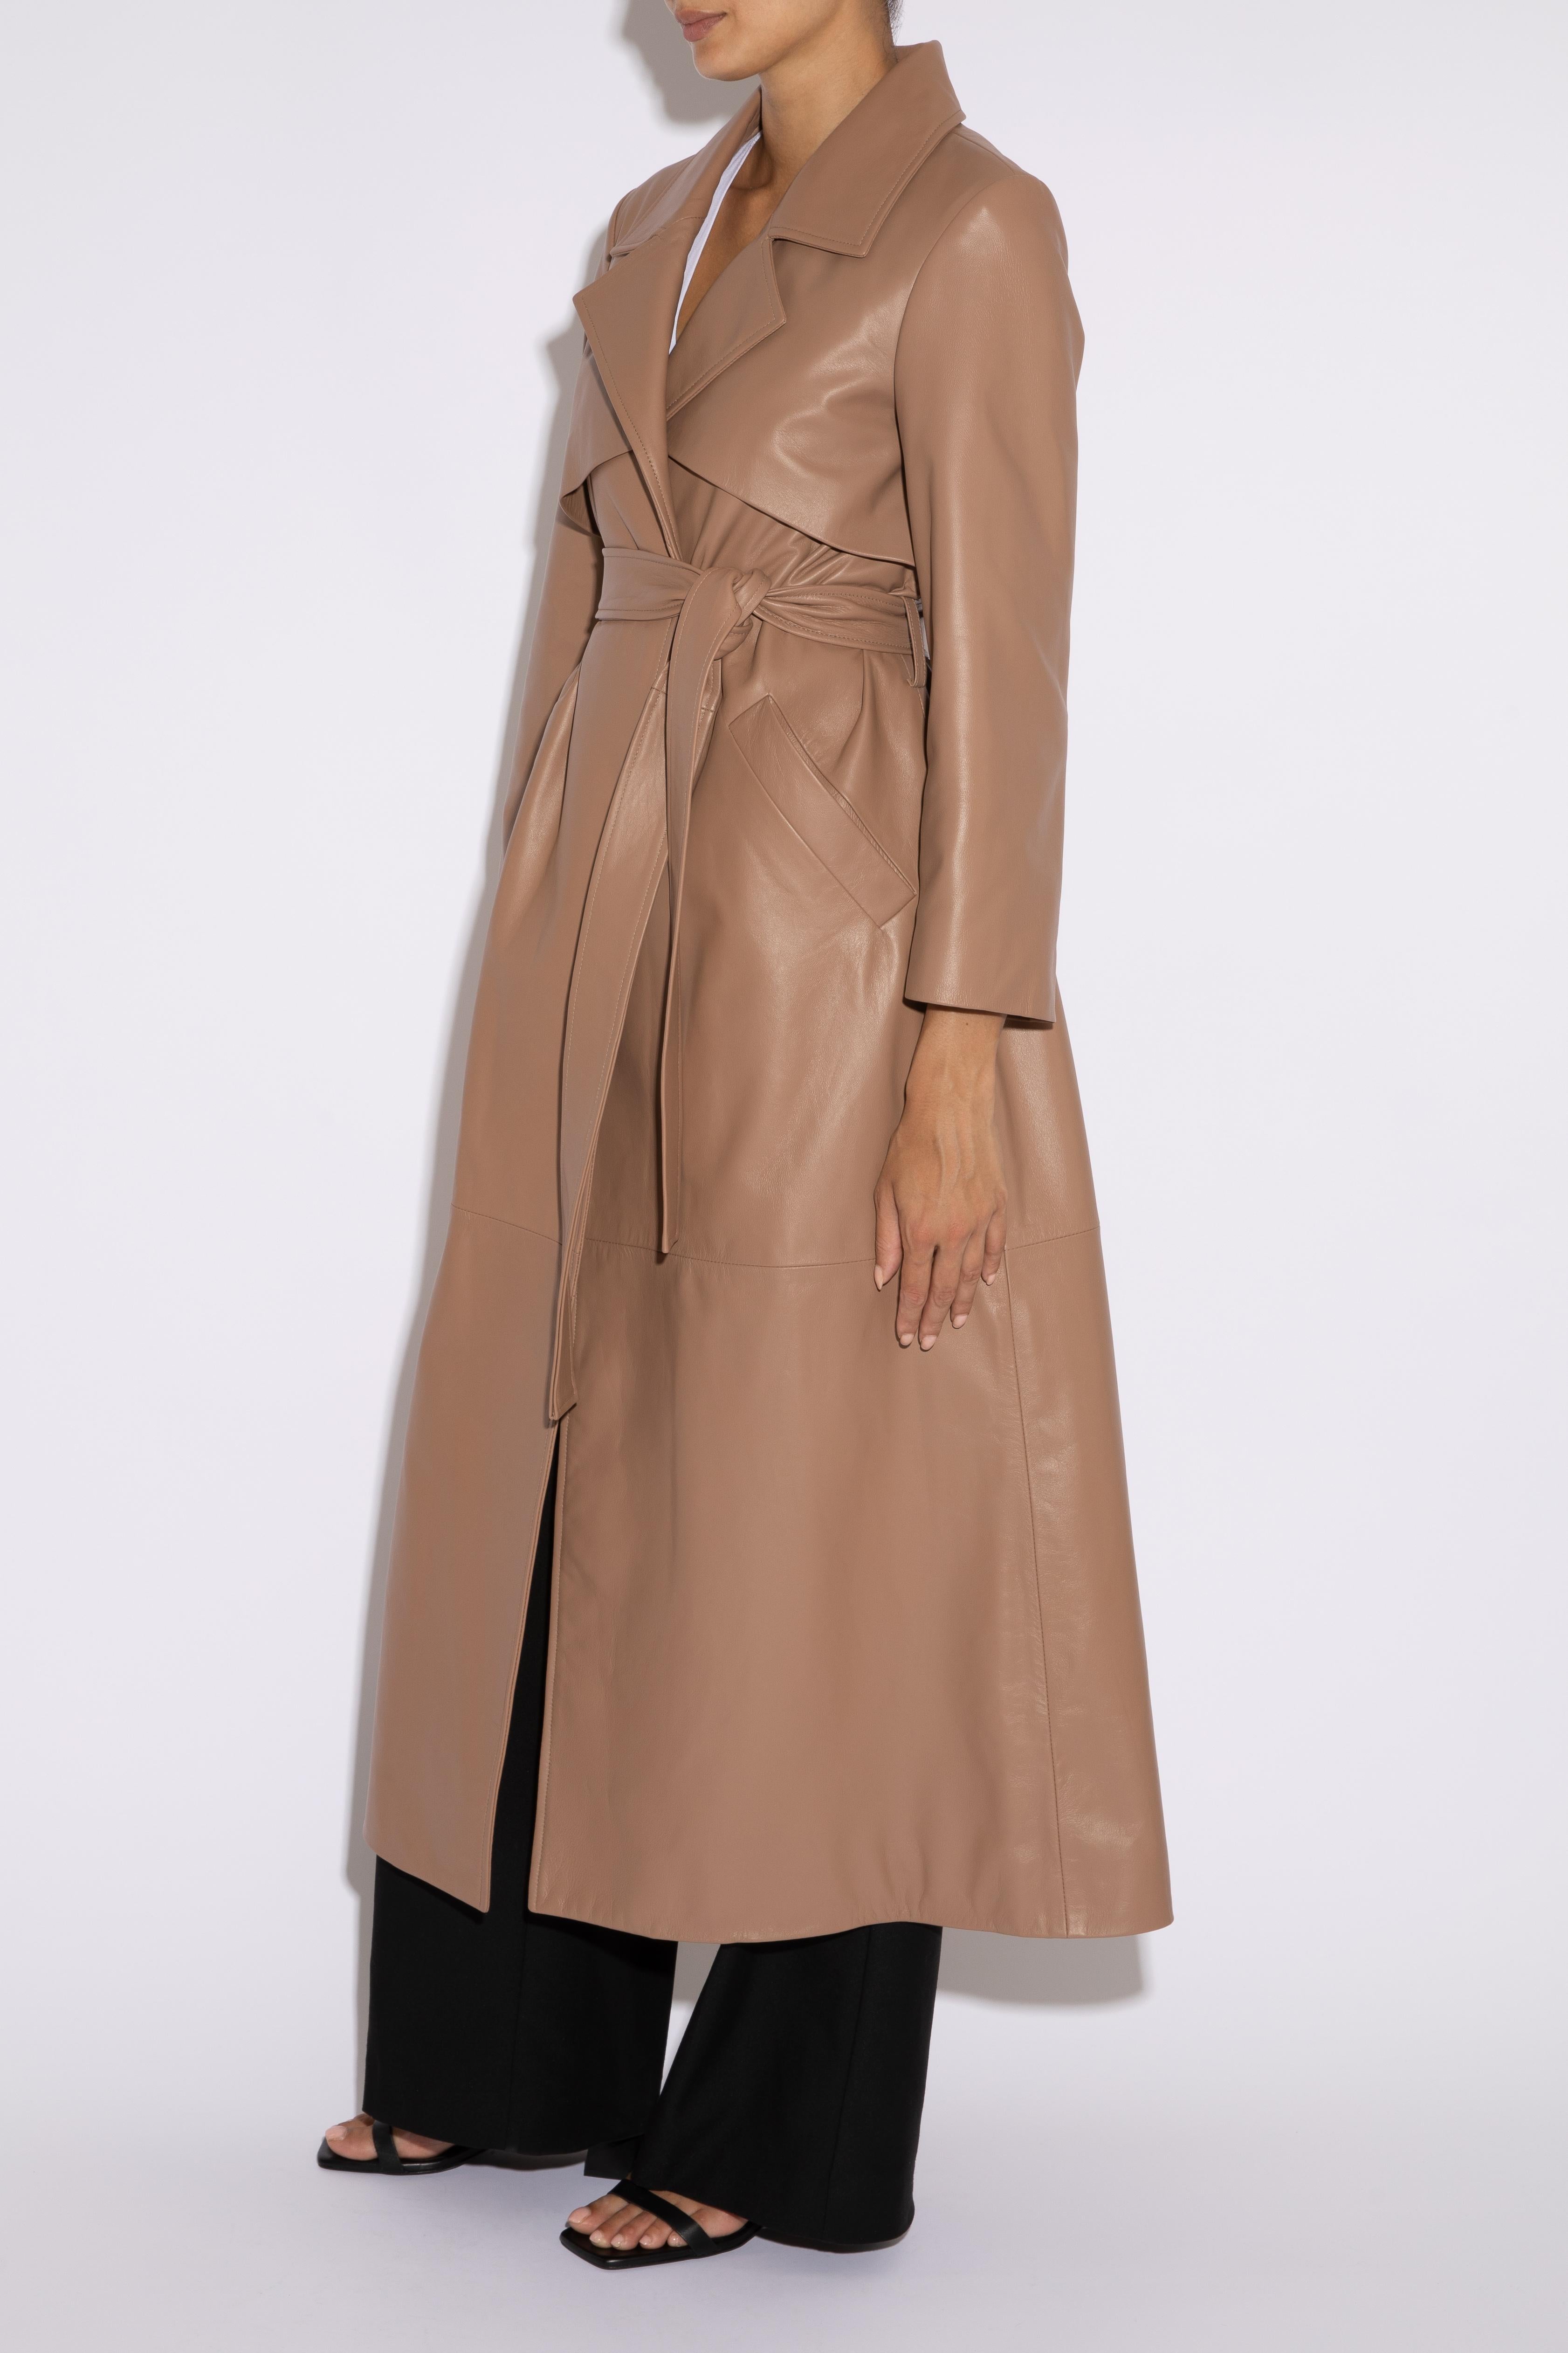 Verheyen London Leather Trench Coat in Taupe Brown - Size uk 8 For Sale 2